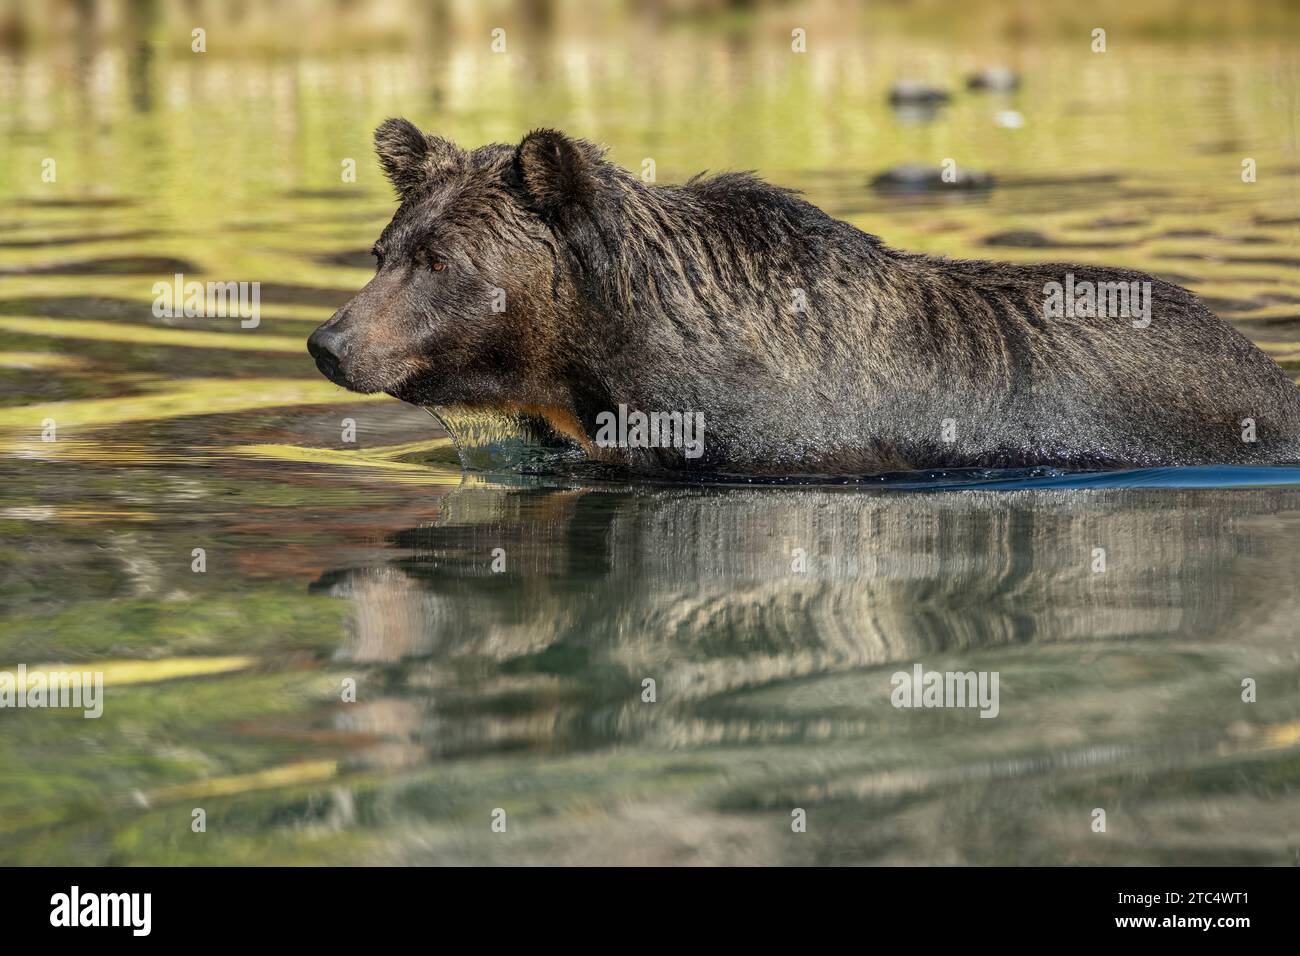 Fishing grizzly bear dripping water, Chilko River, BC Stock Photo